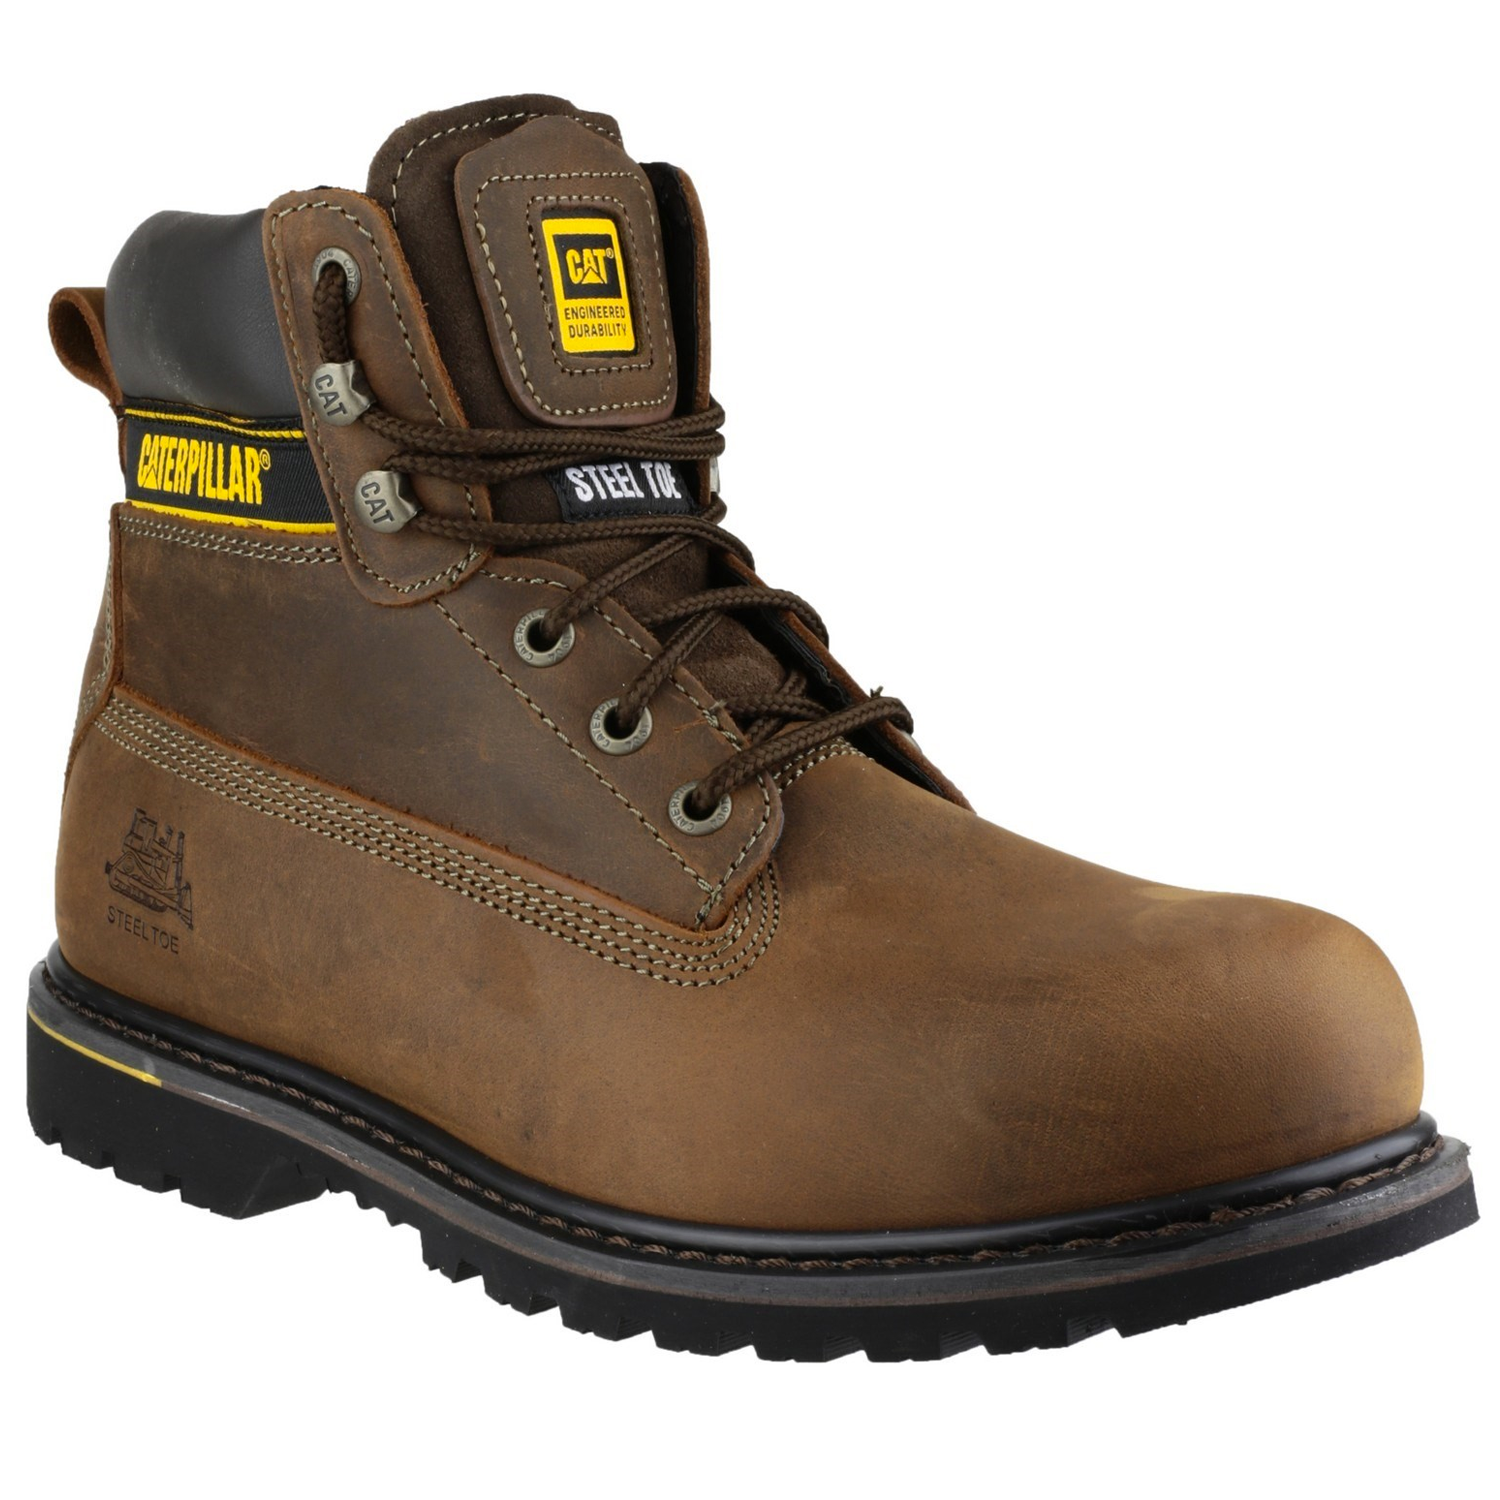 Caterpillar CAT Holton S3 Brown Safety Work Boot.